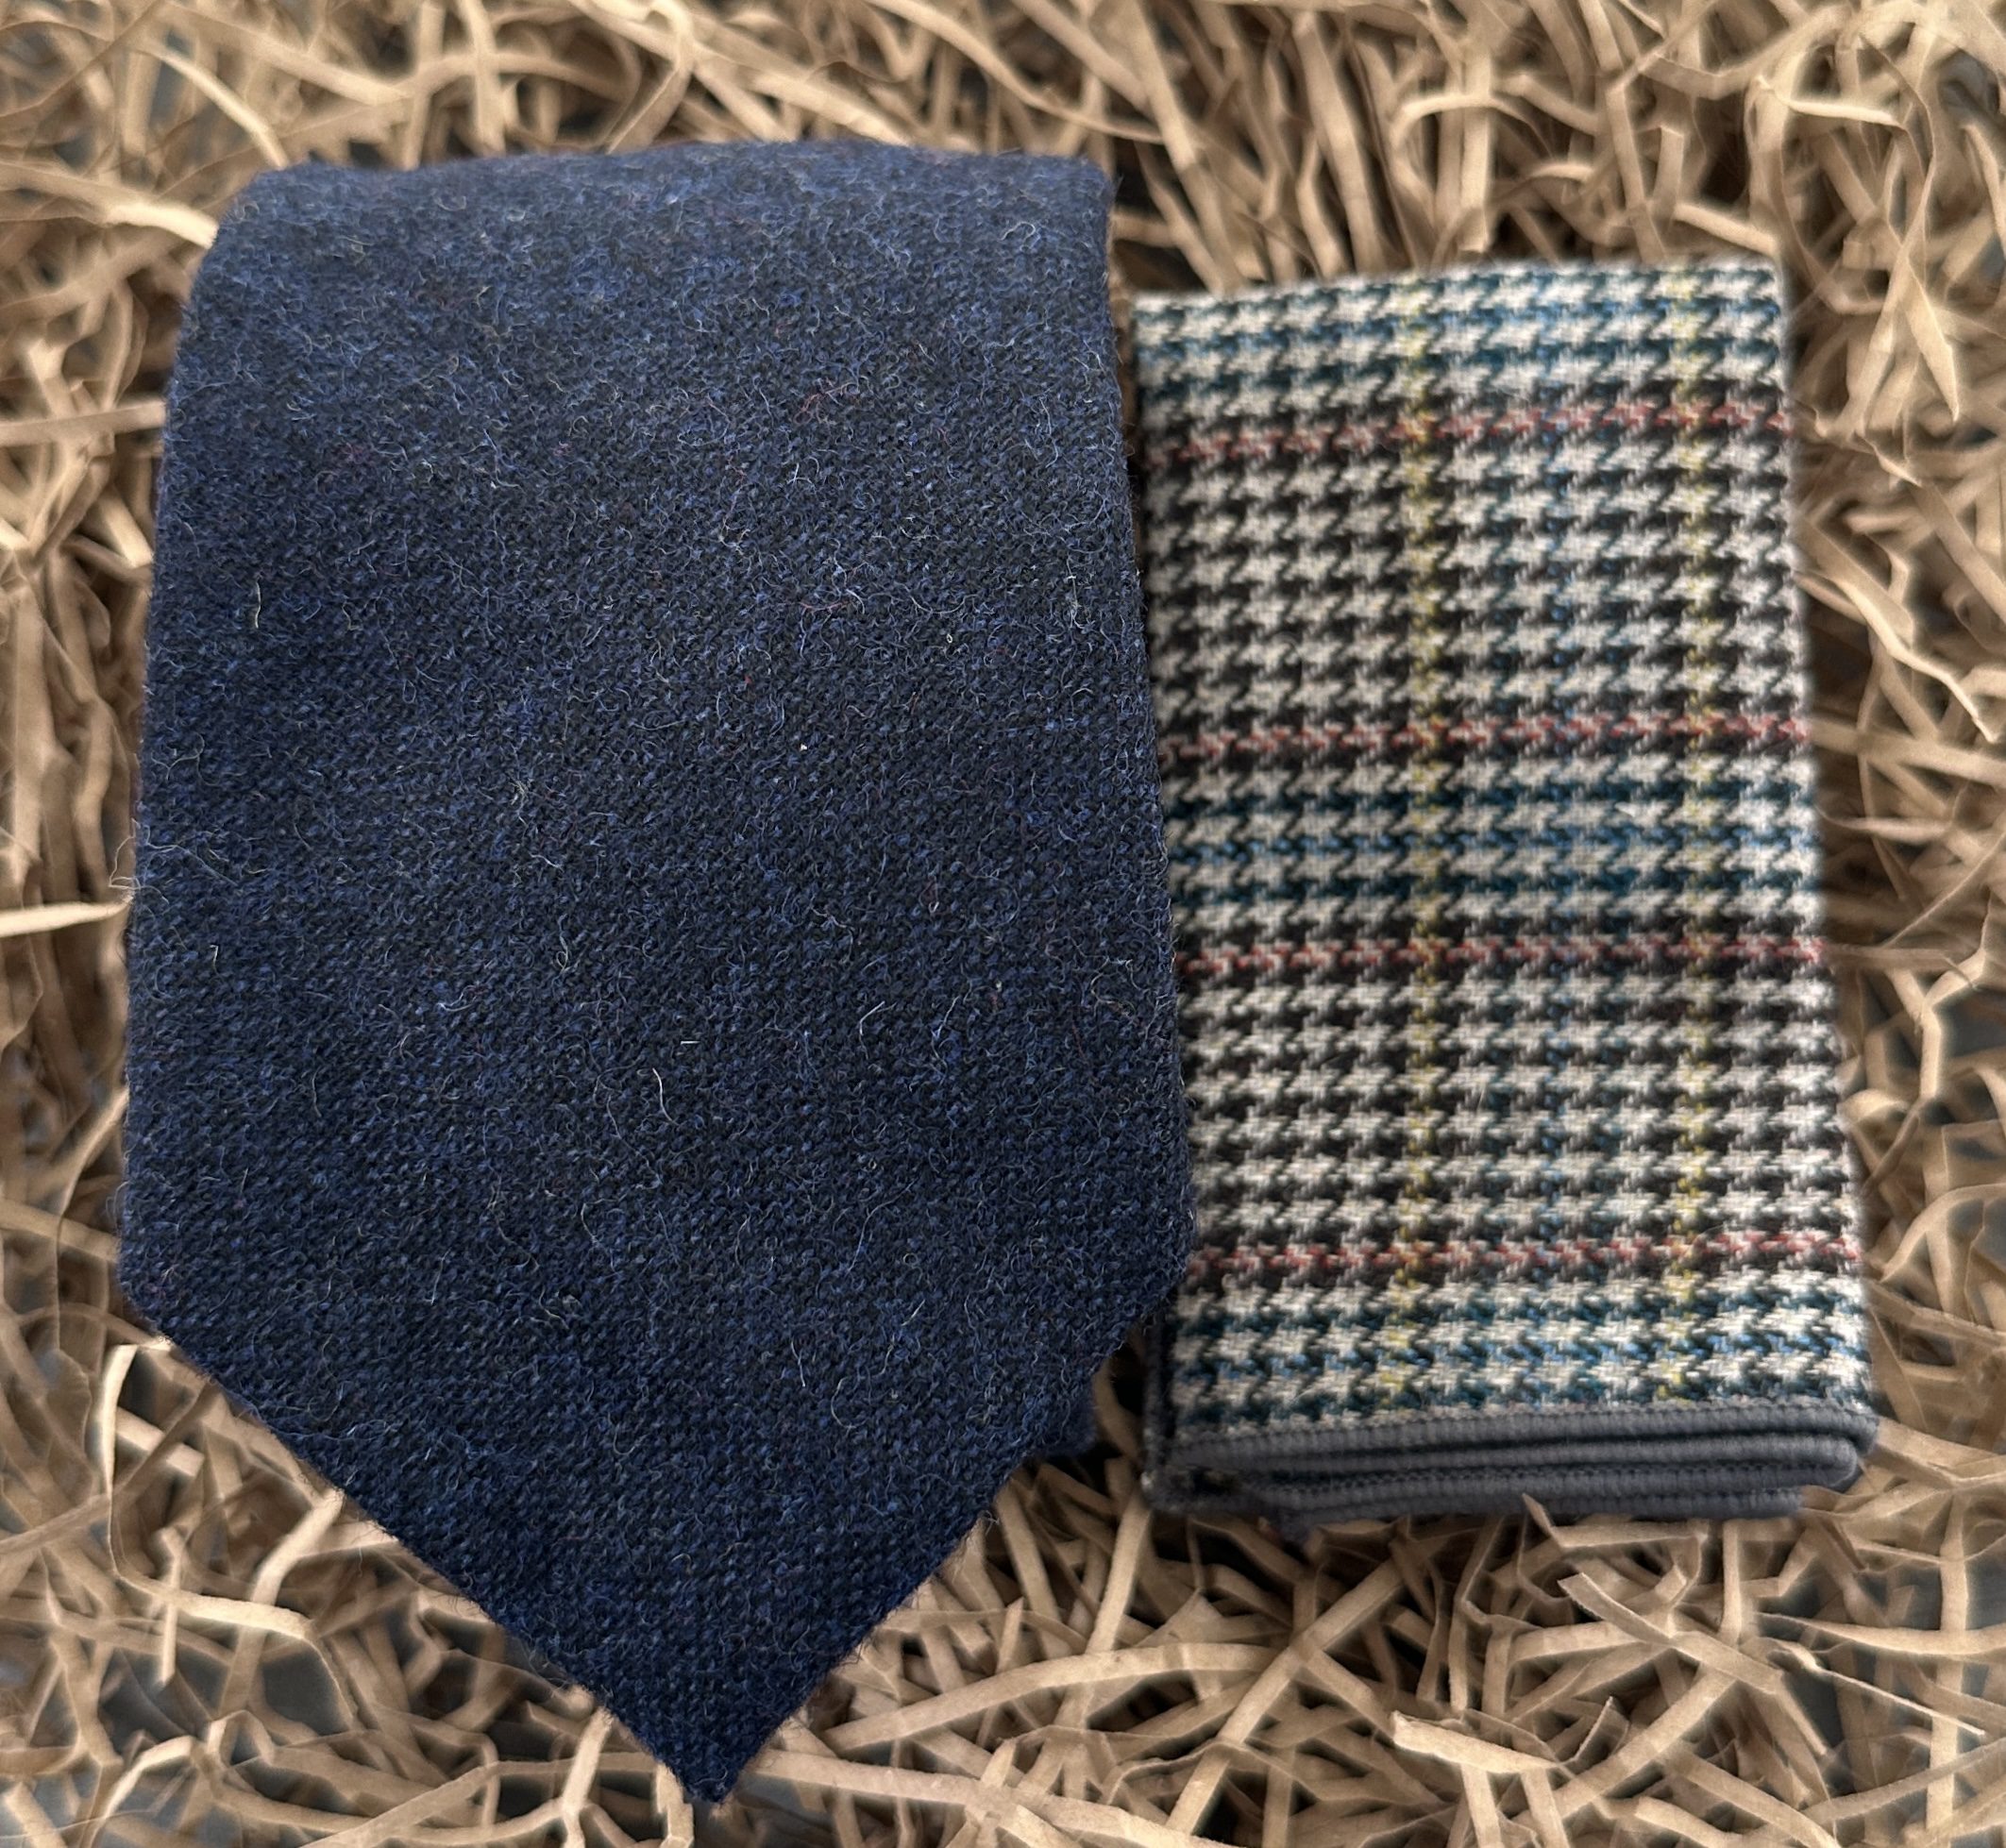 A navy blue mens wool tie and check pocket square. Ideal for mens gifts and groomsmen gifts.